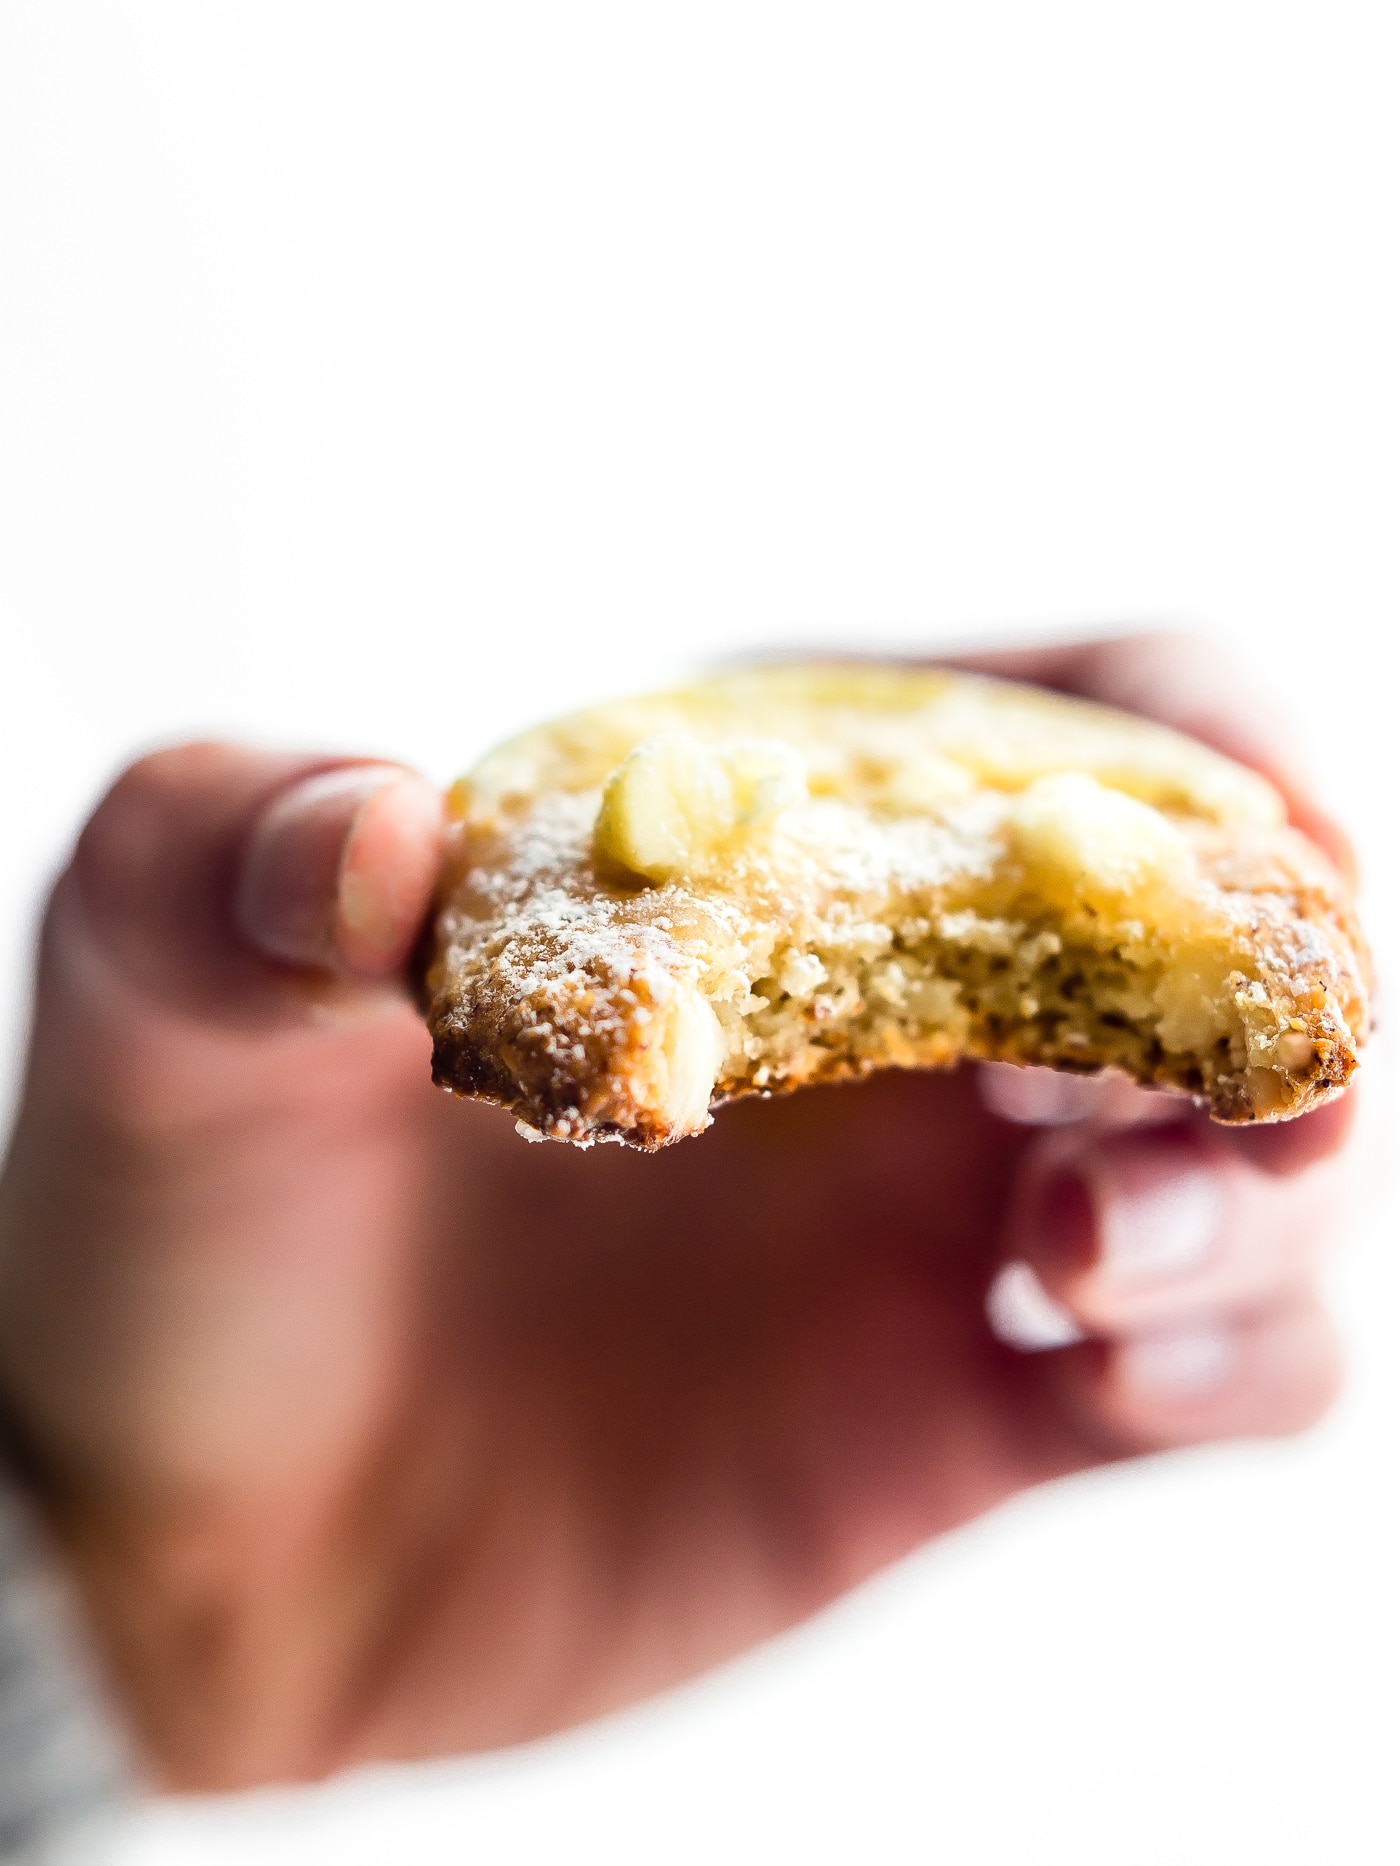 hand holding a lemon glazed cookie with bite taken out of it